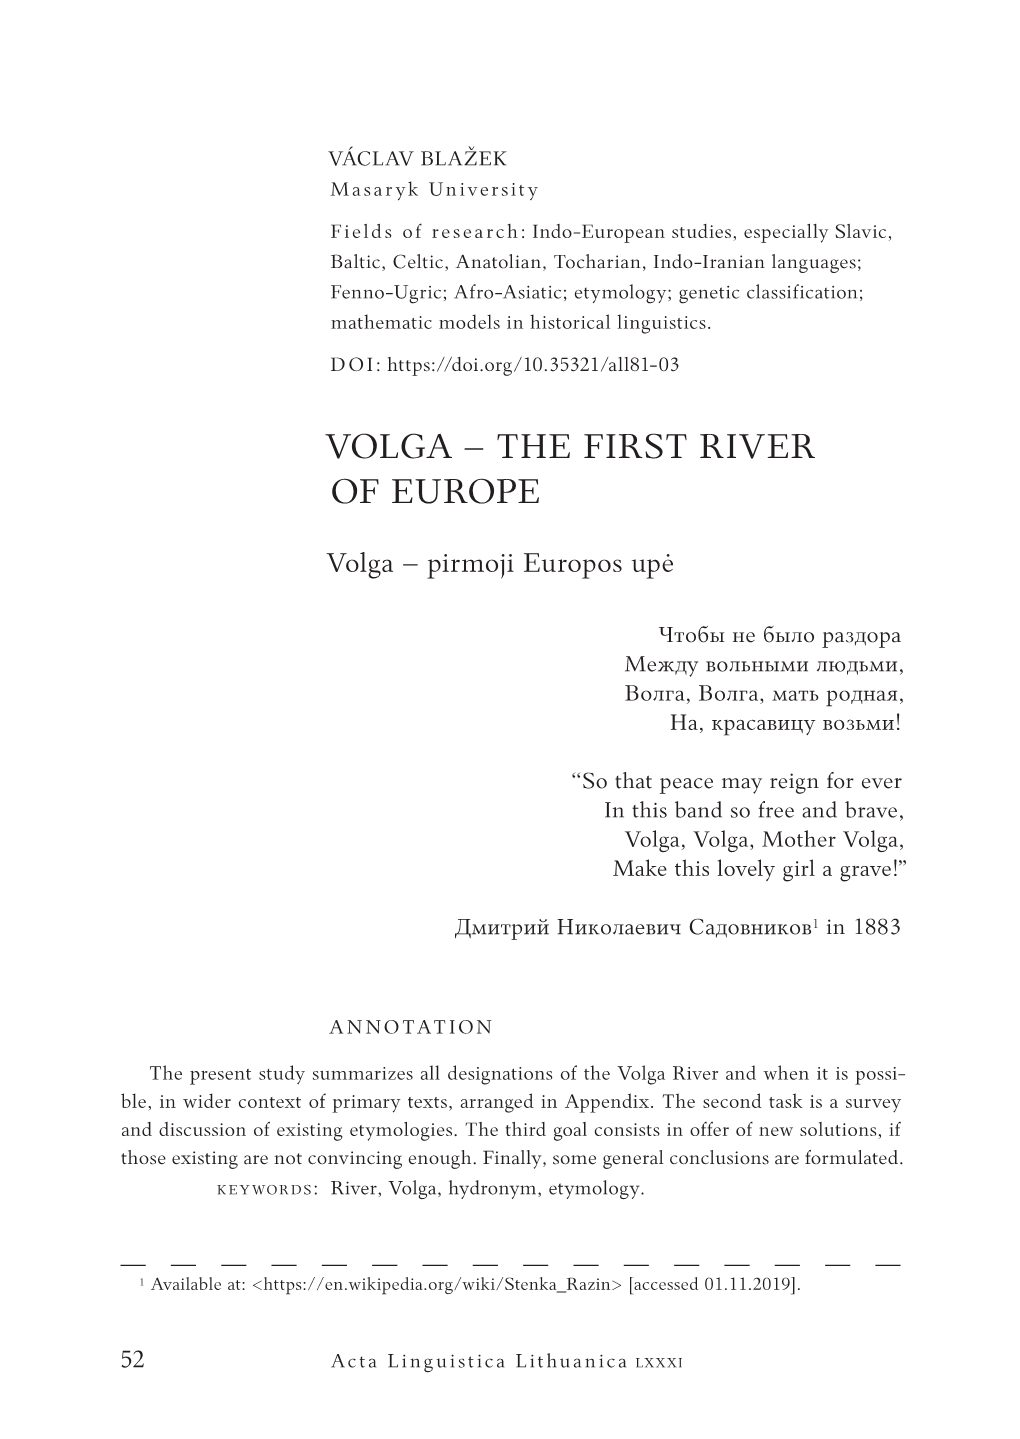 Volga – the First River of Europe